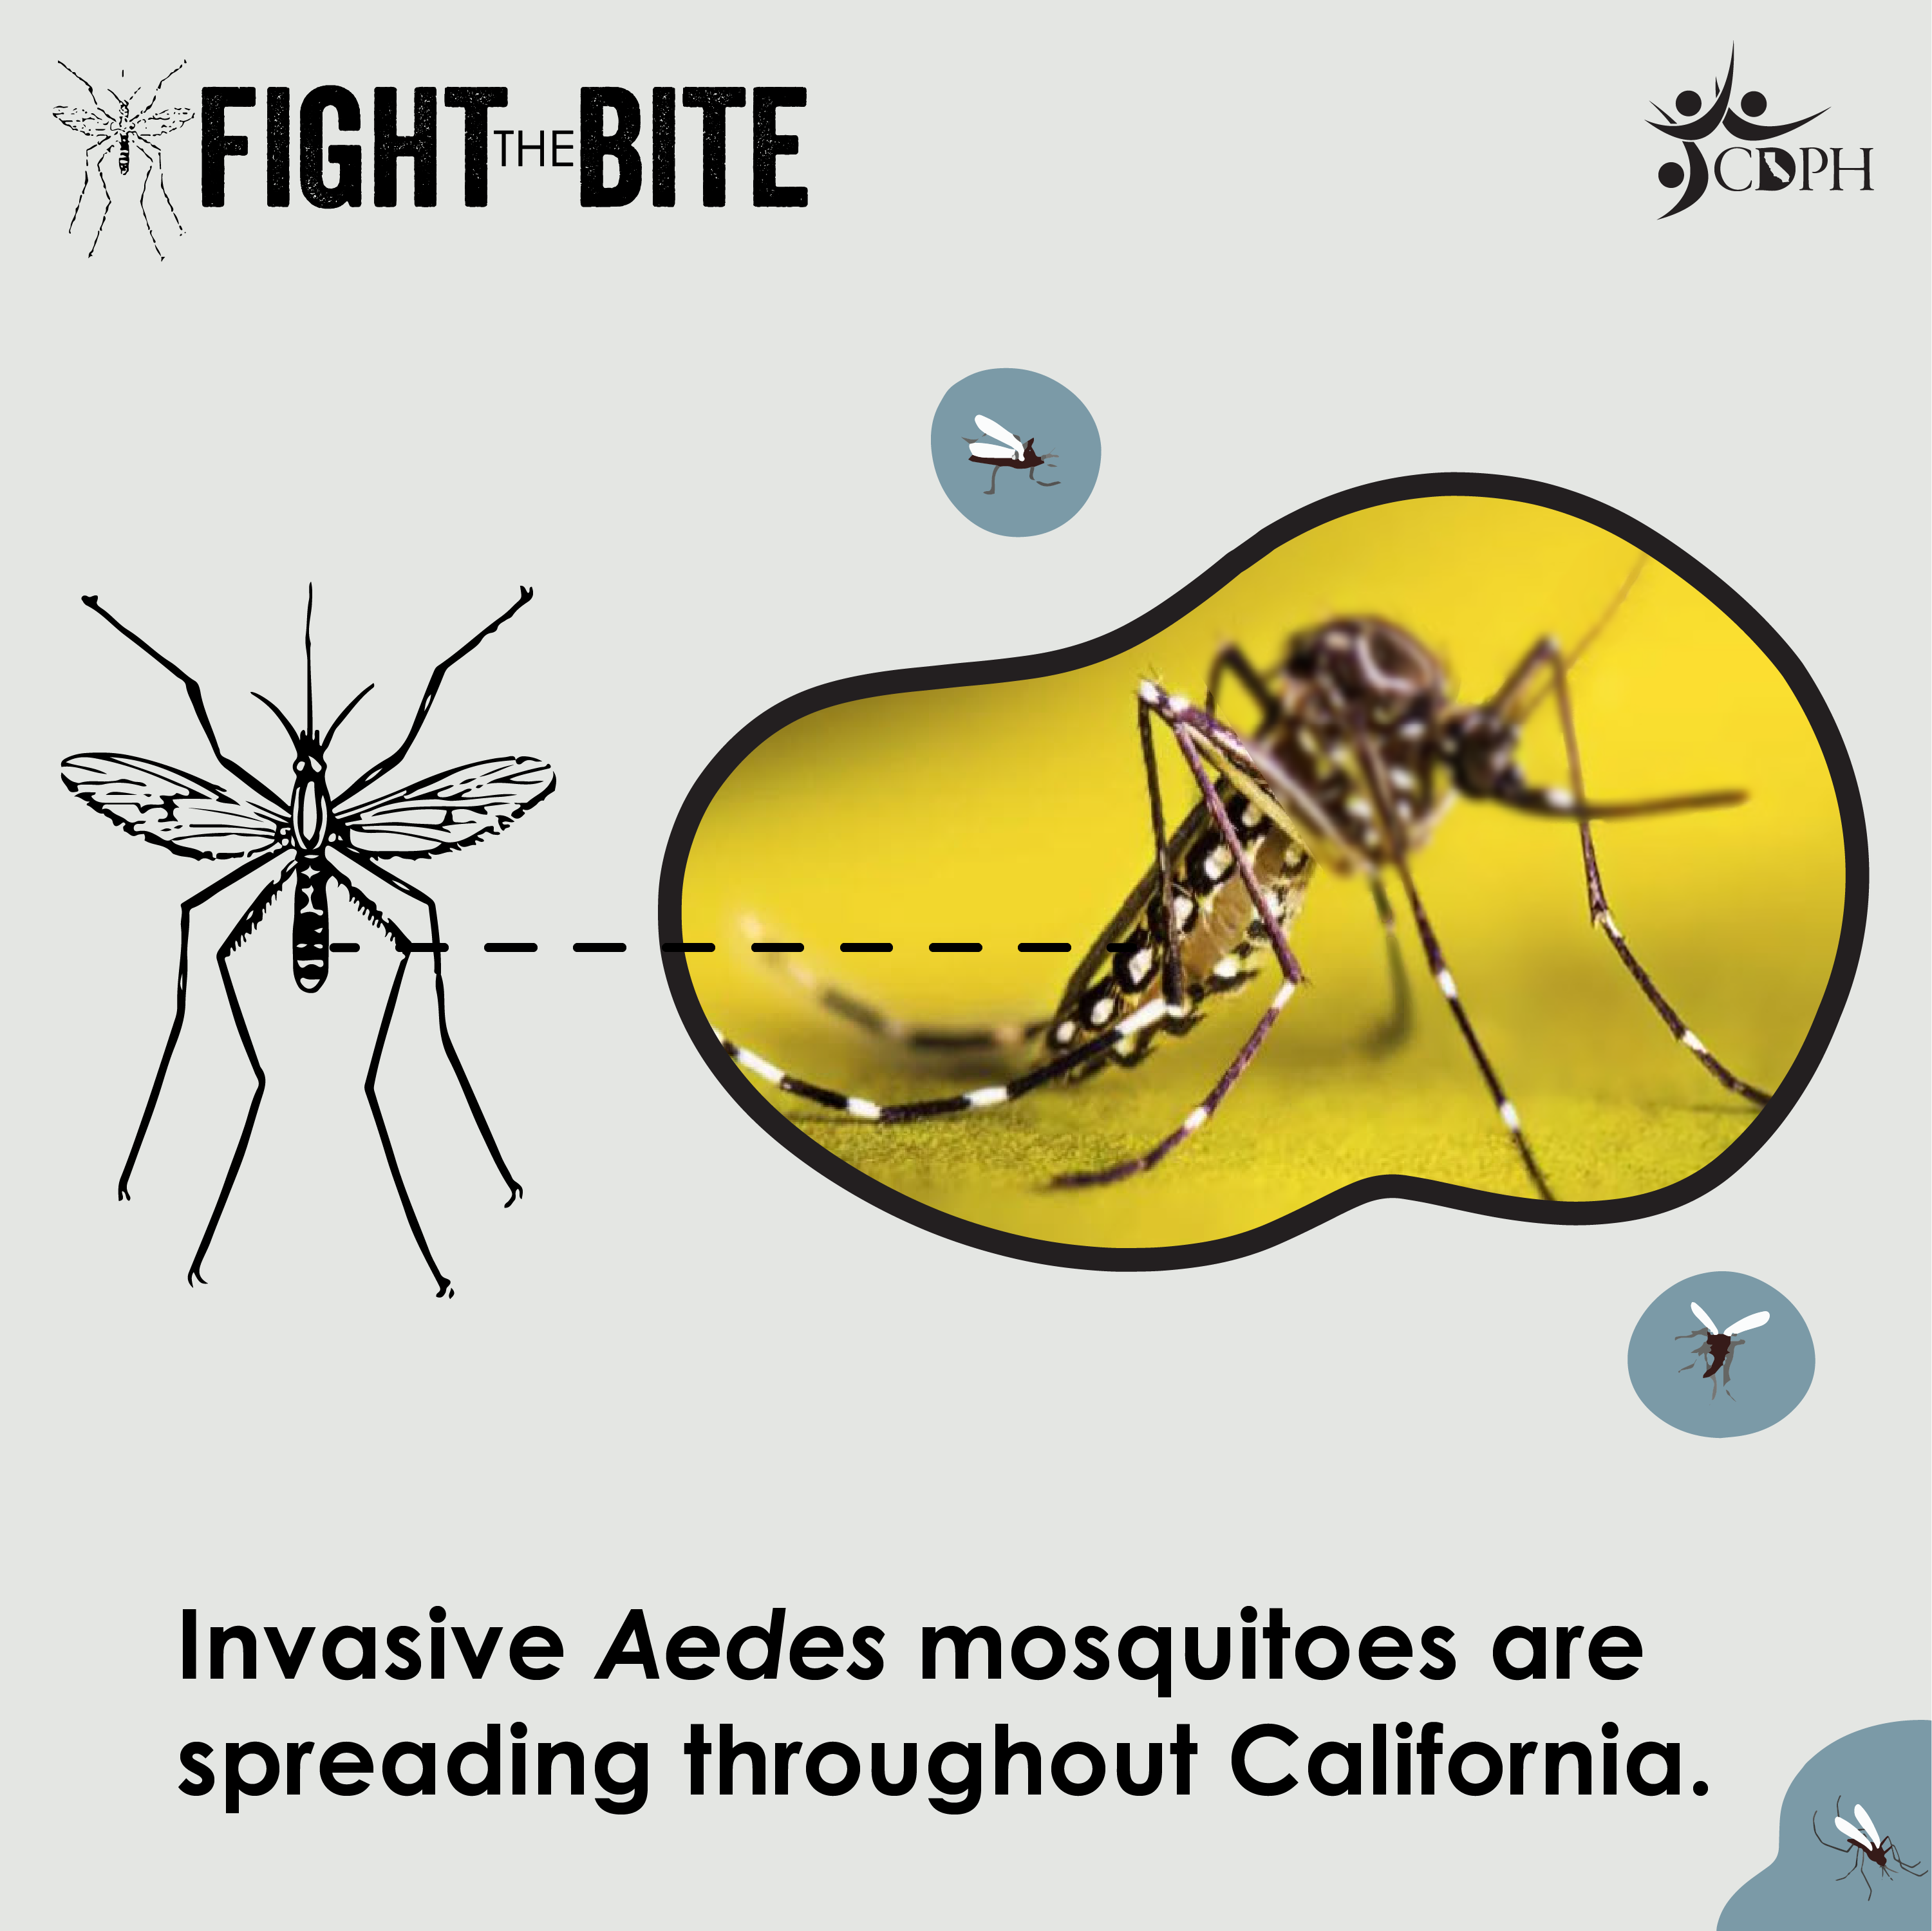 Invasive Aedes mosquitoes are spreading throughout California.